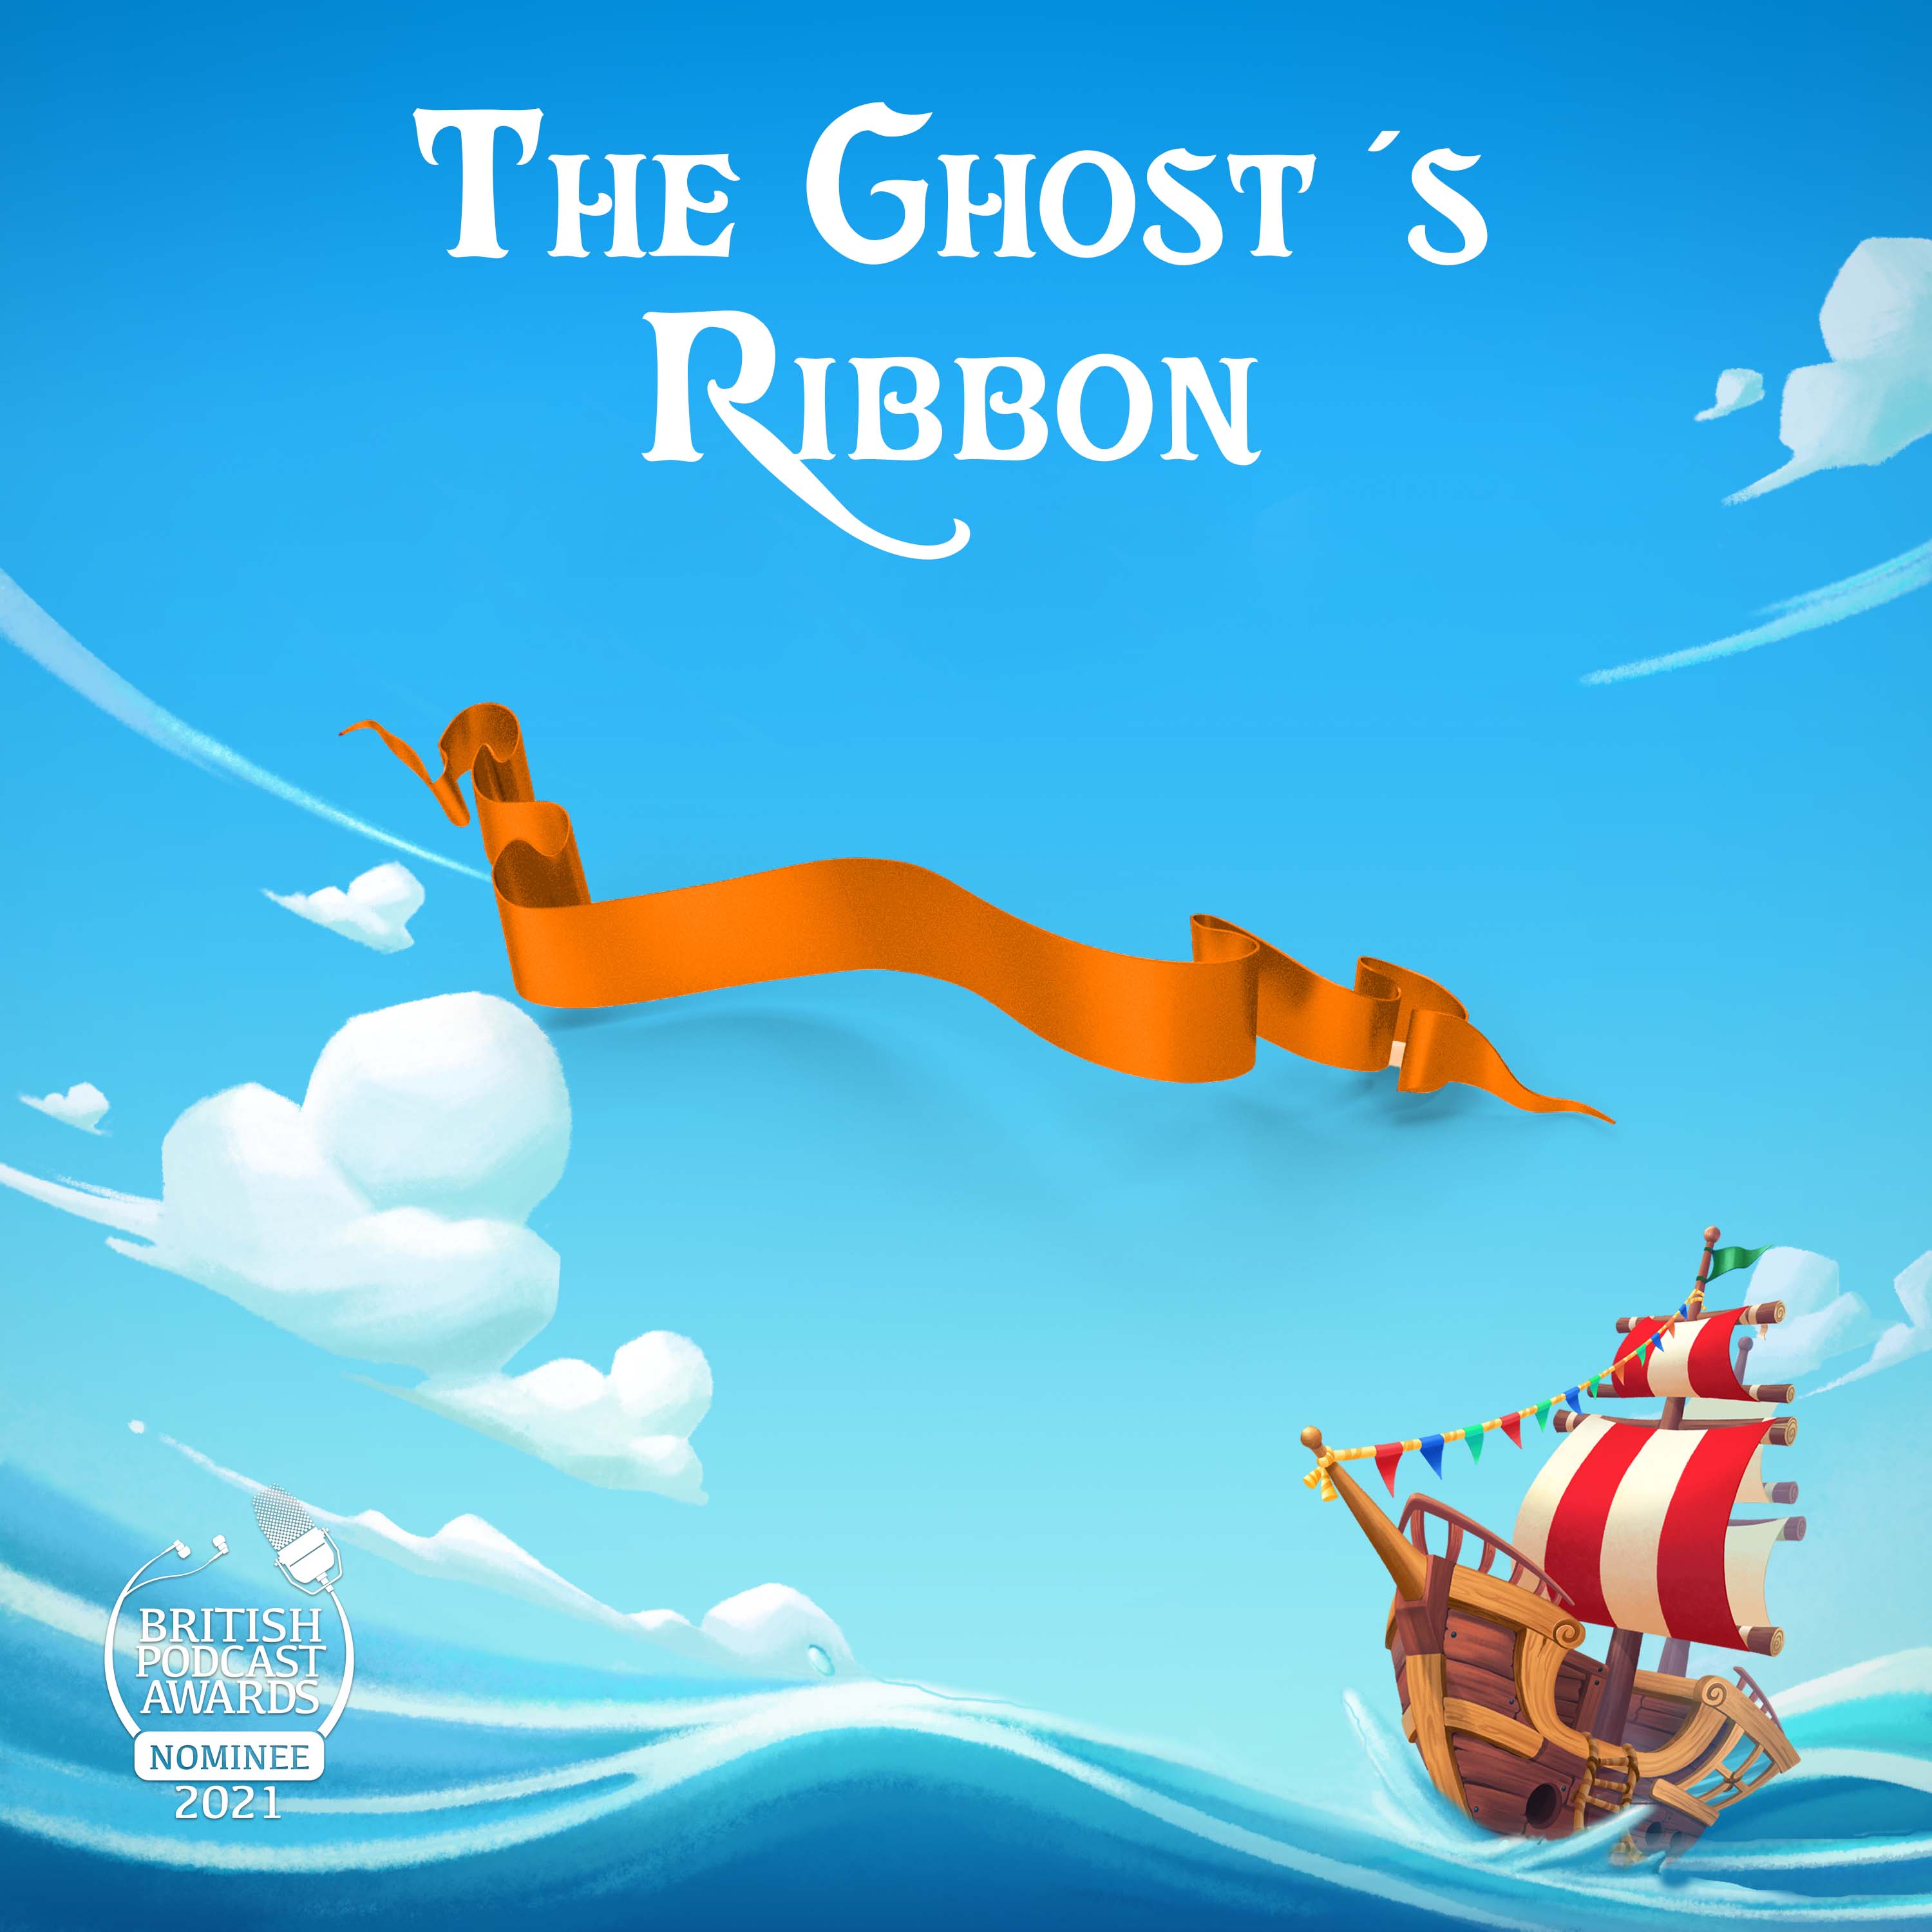 The Ghost’s Ribbon